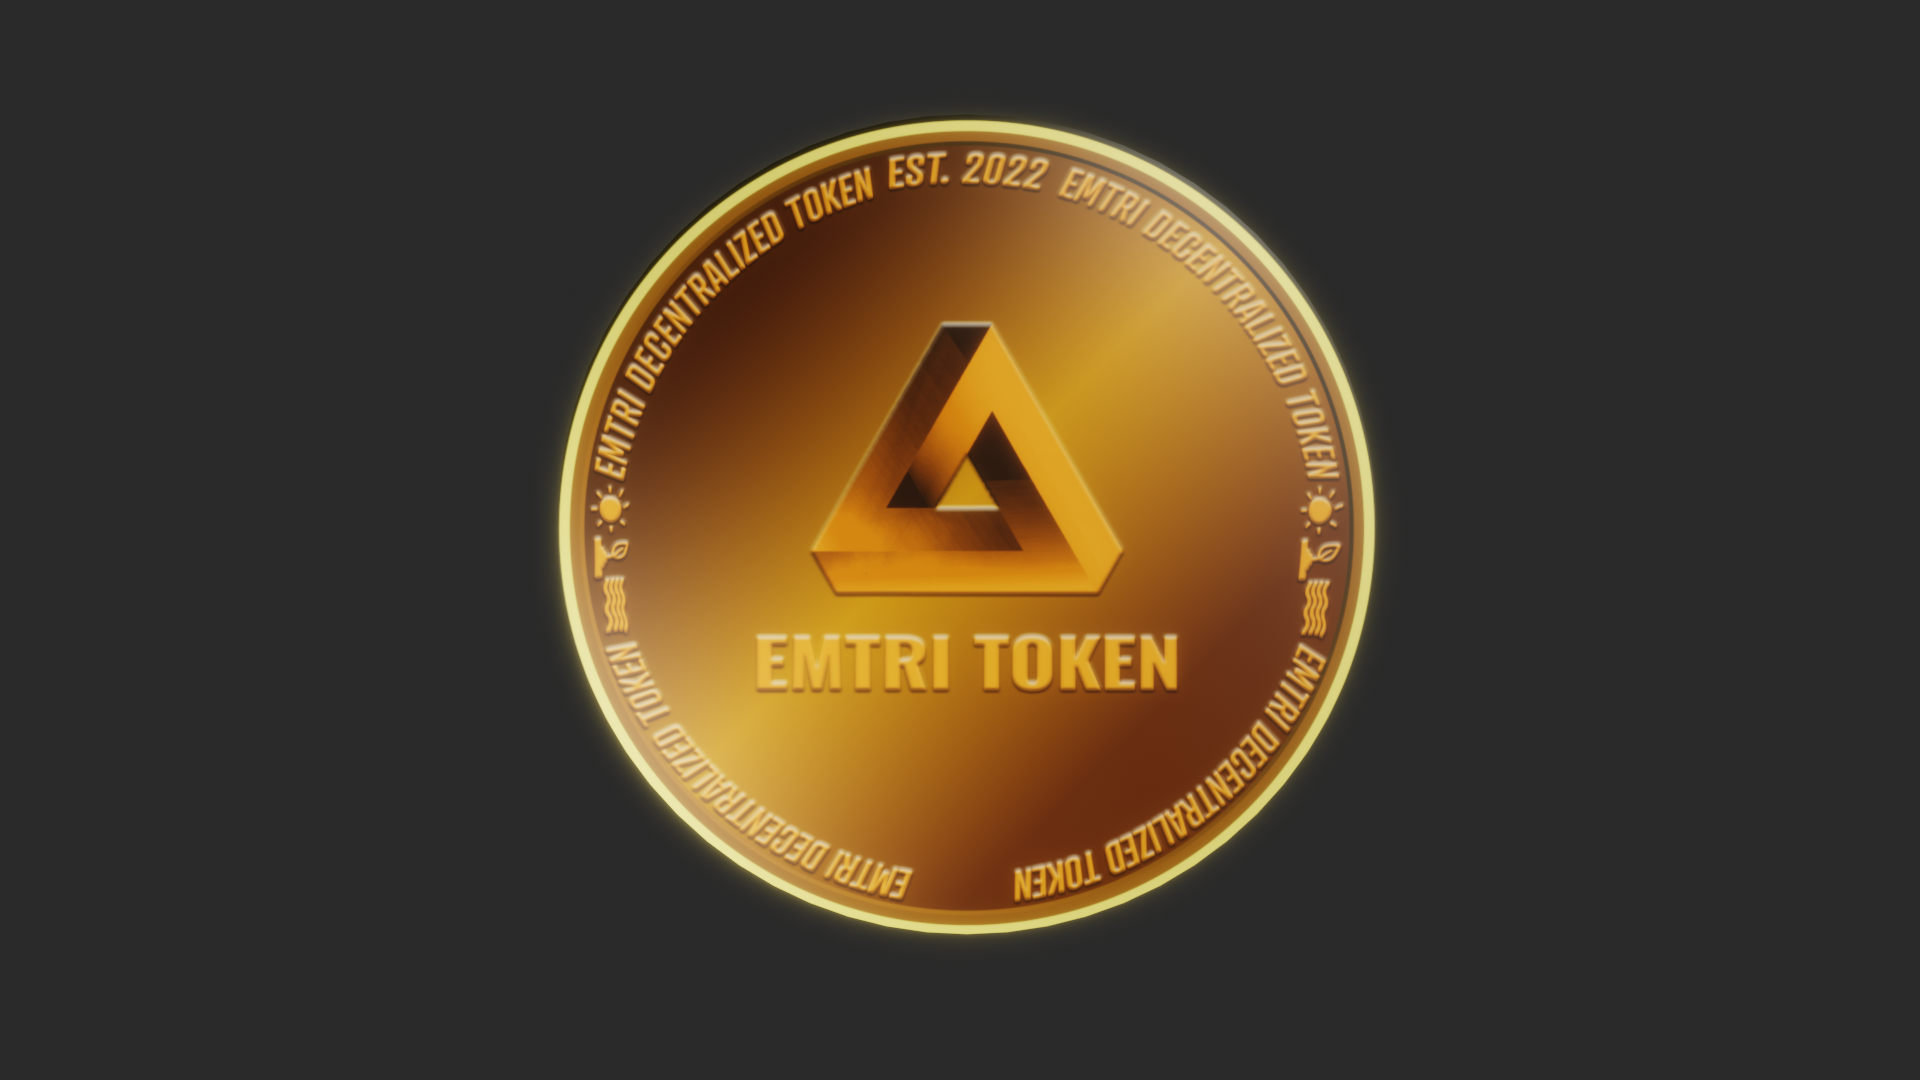 Huge Community Milestone: Mendocino Clone Company Becomes First In The World To Receive EMTRI Tokens For Providing True Genetic Information On A Blockchain.